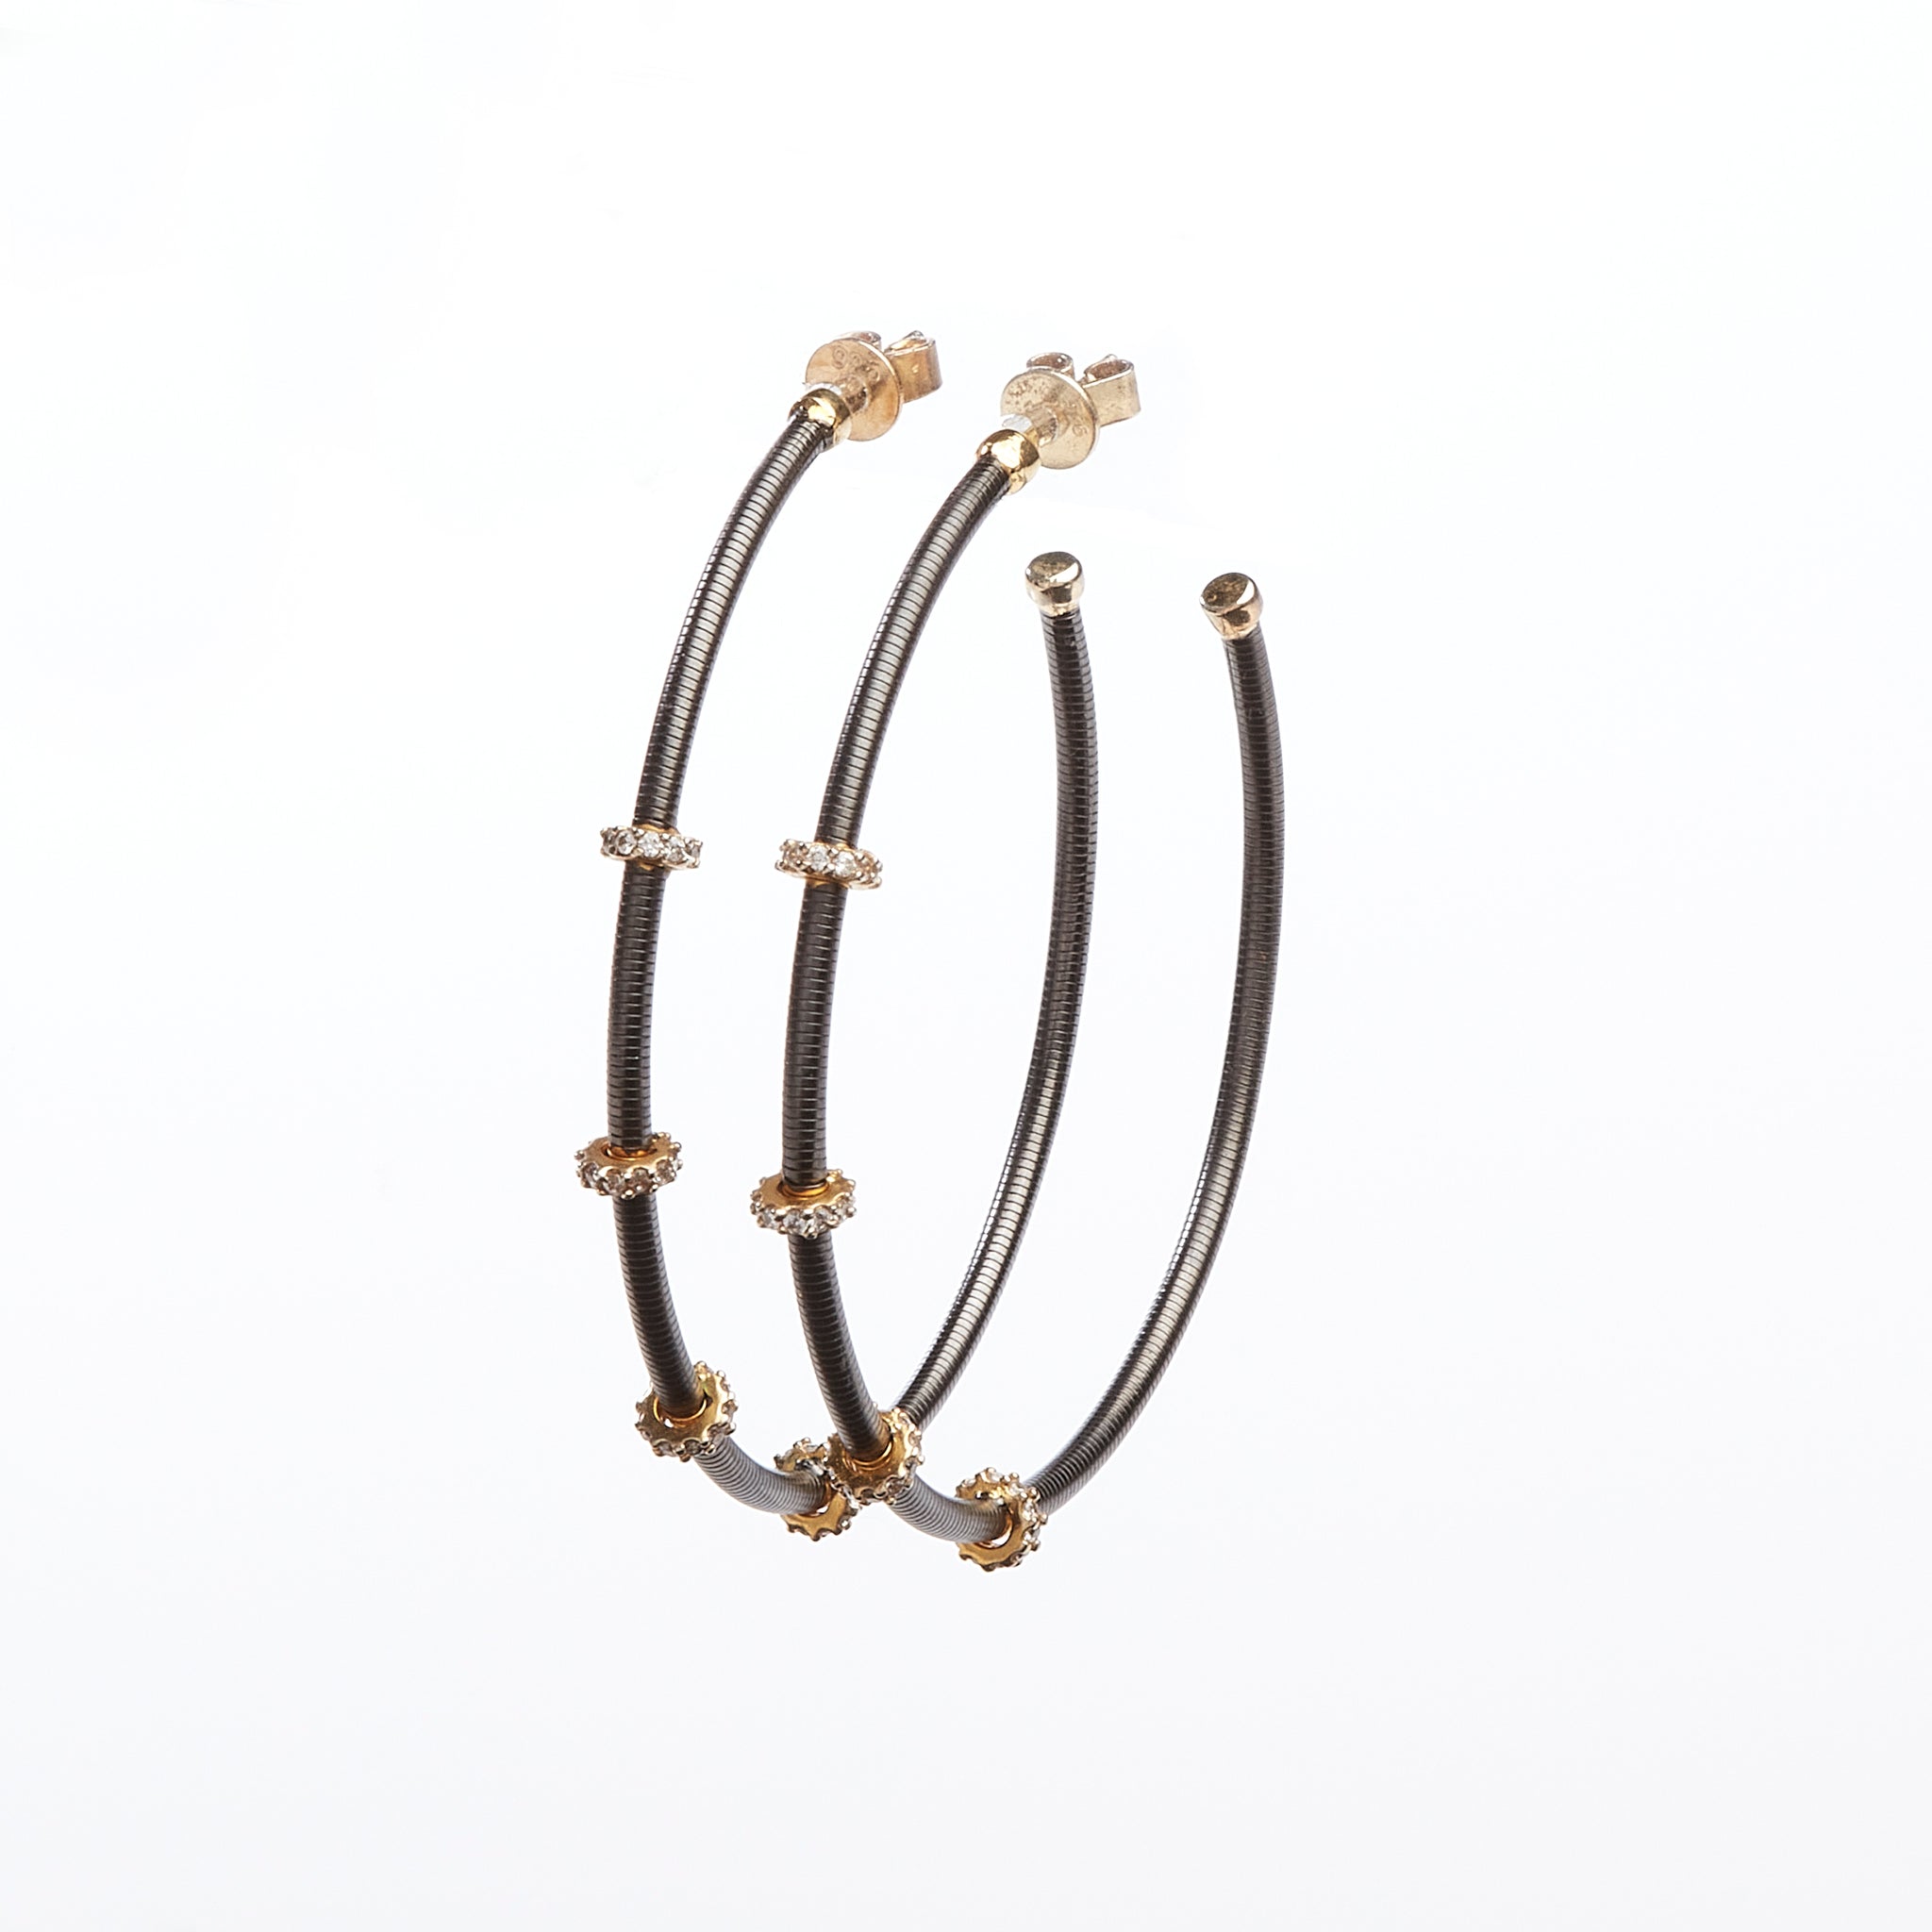 Alessandra Hoops (Black and Gold)